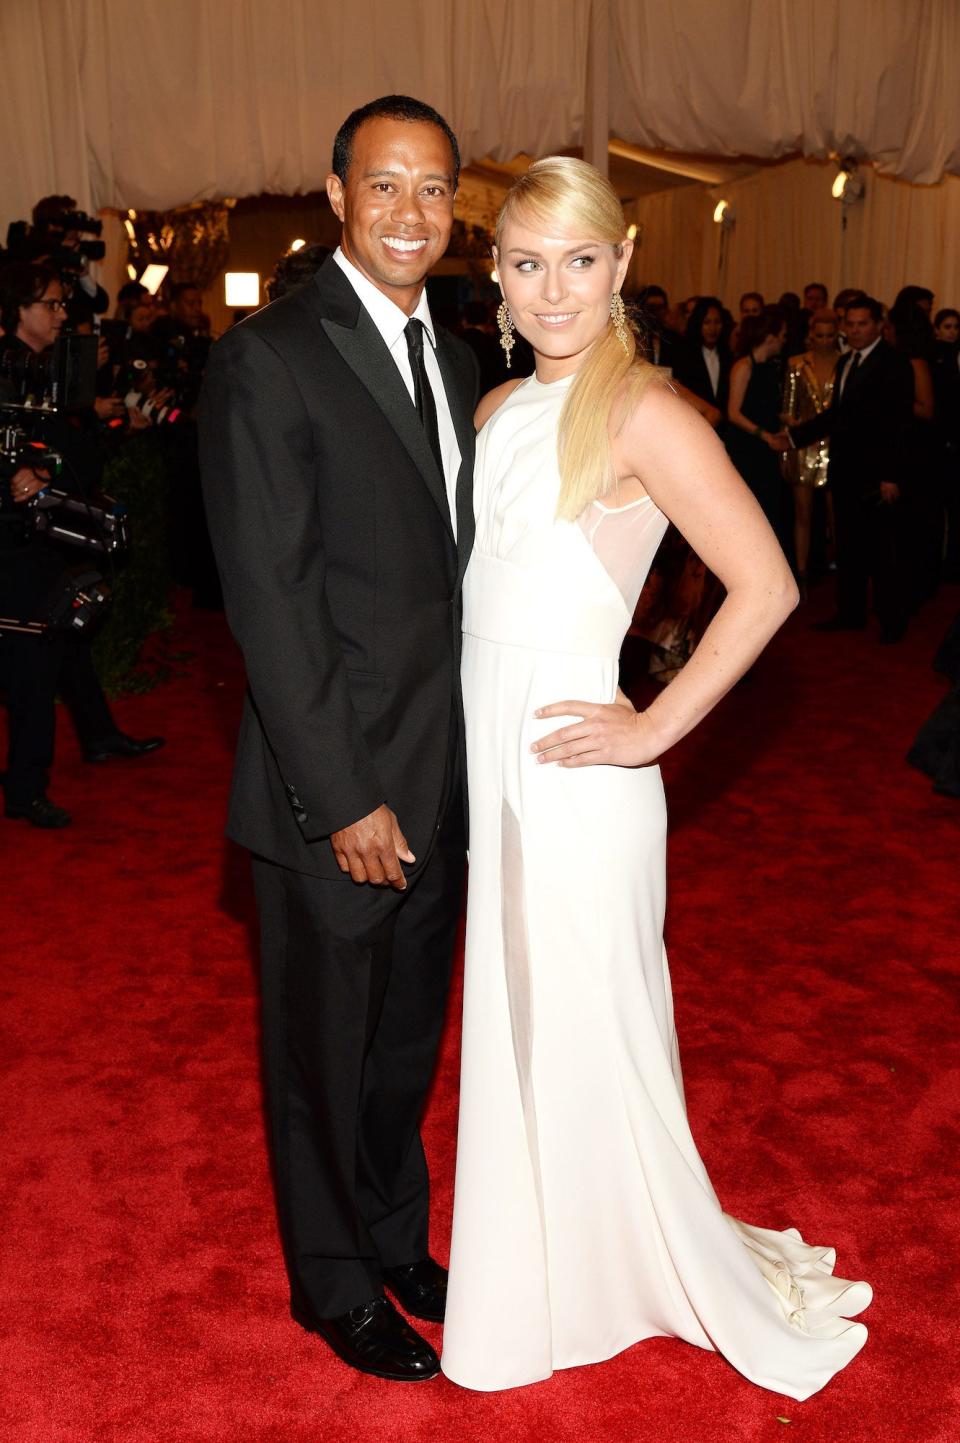 Tiger Woods and Lindsey Vonn attend the 2013 Met Gala.